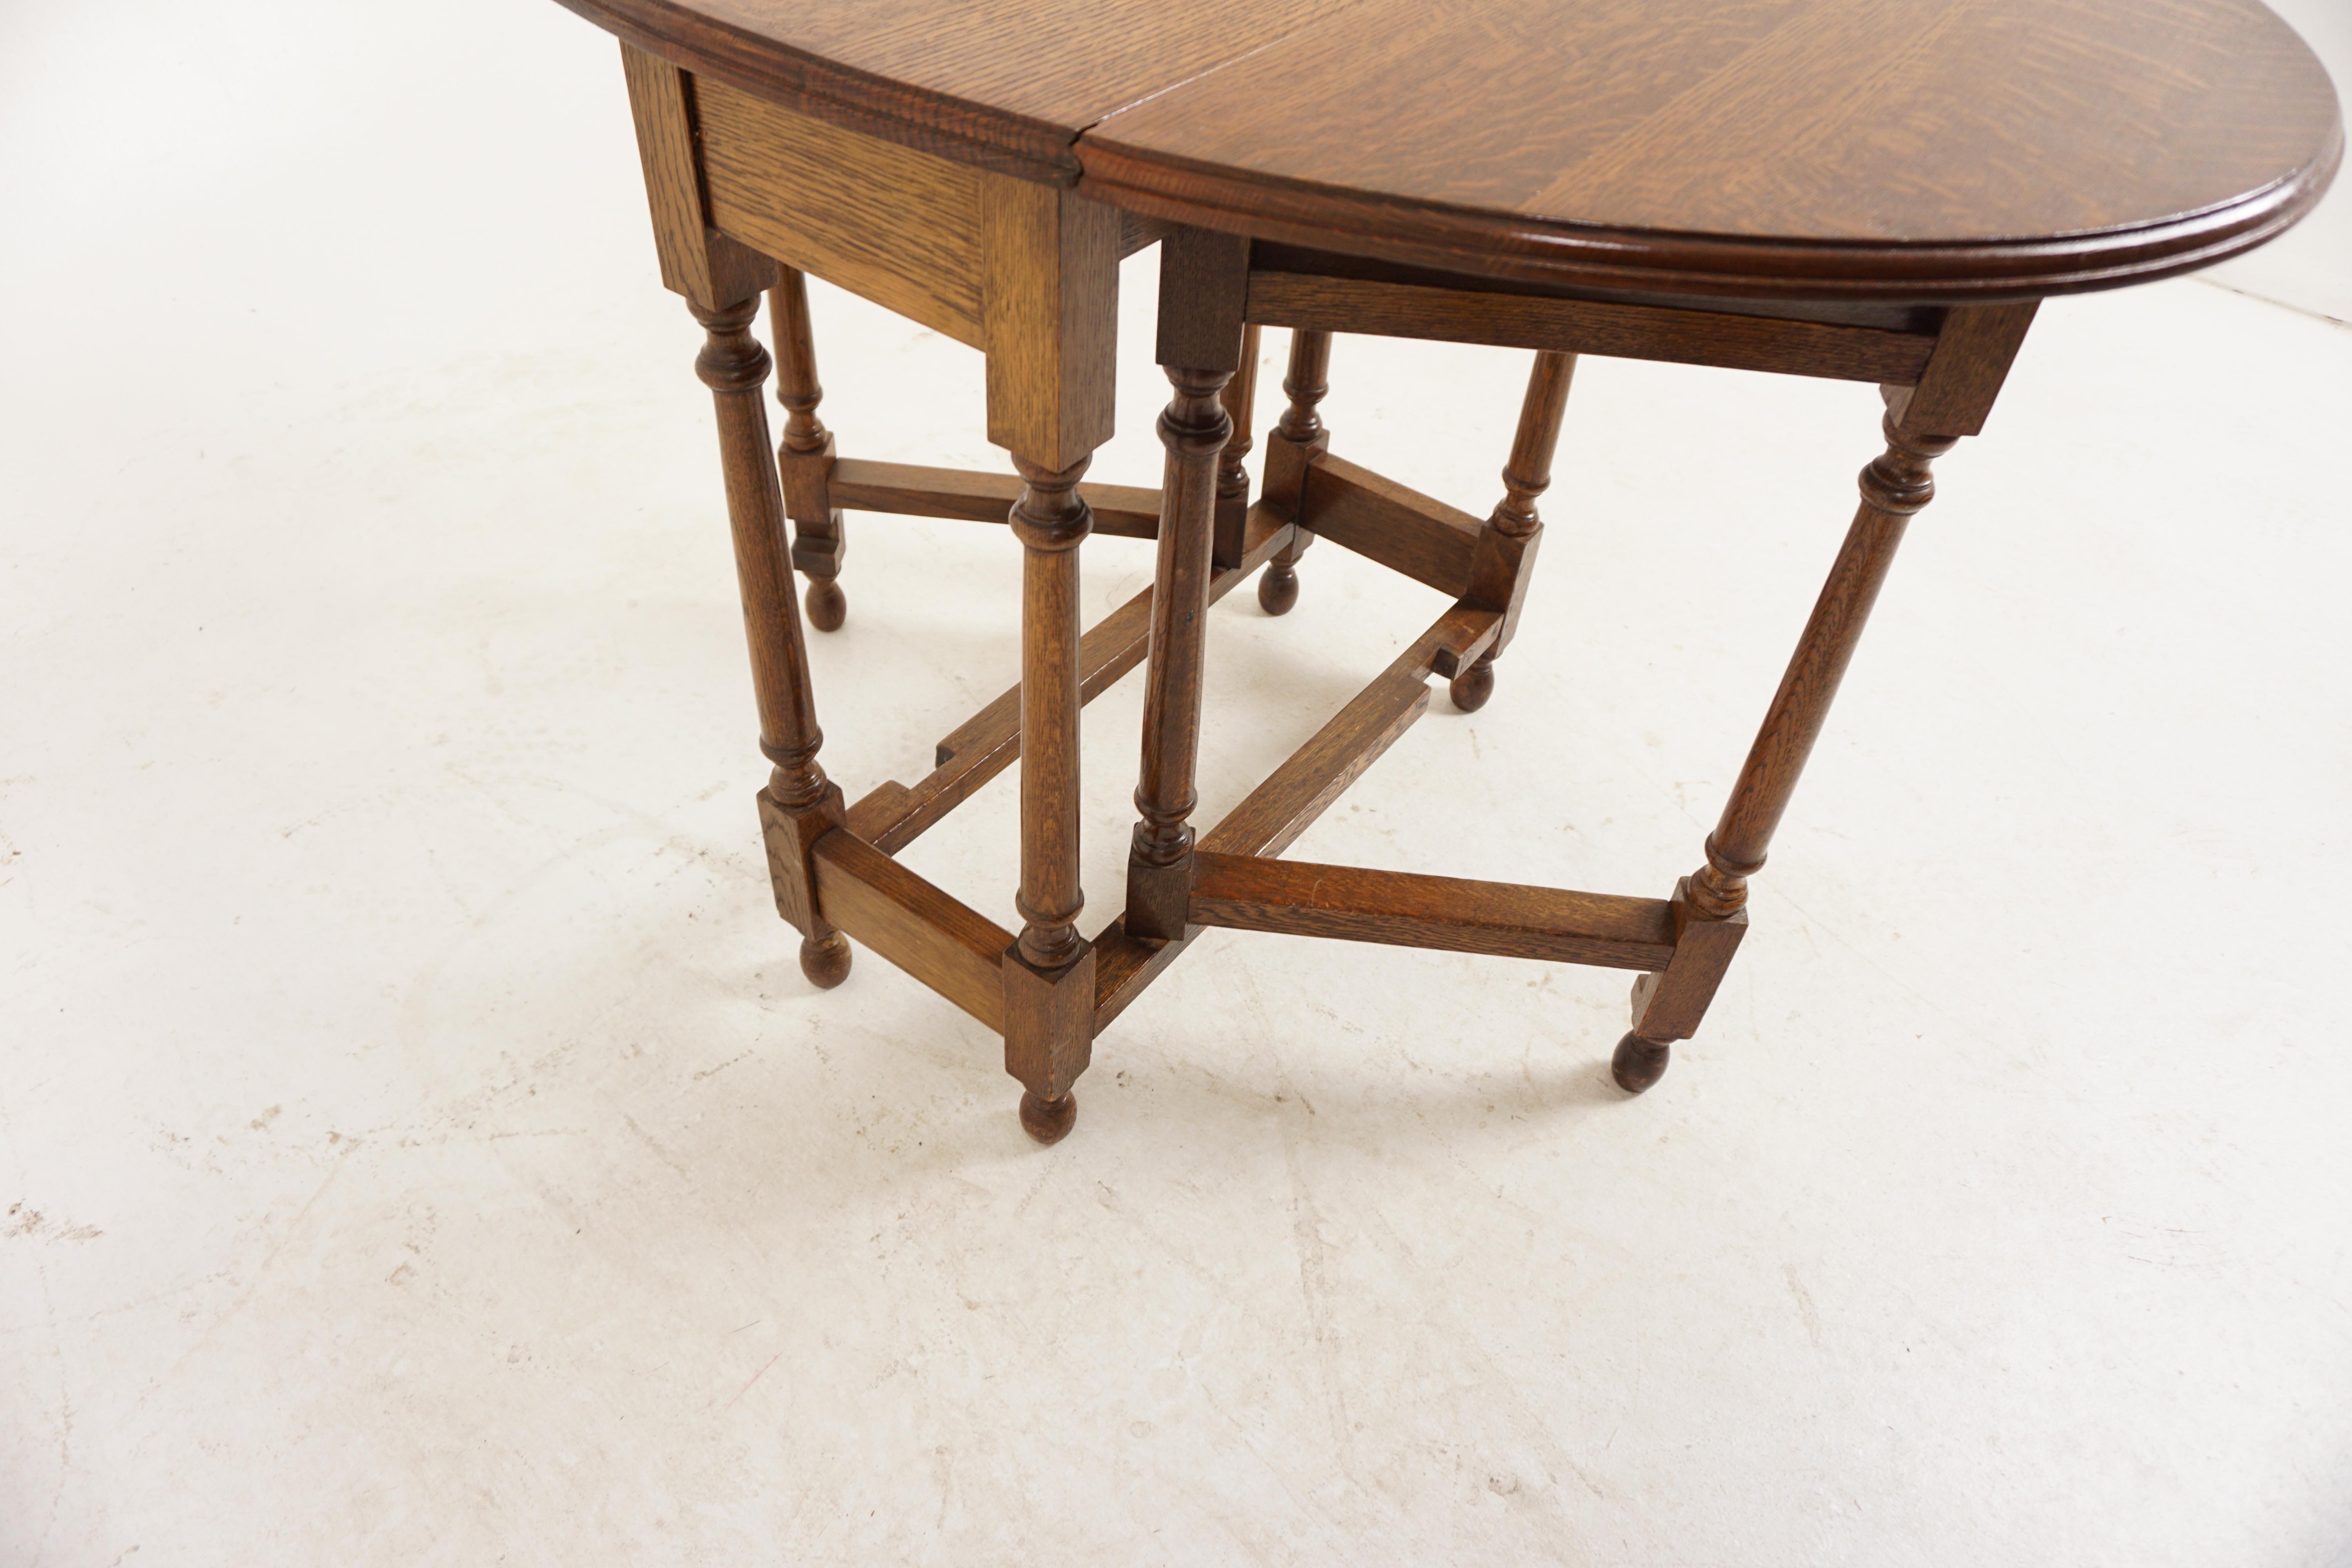 Hand-Crafted Antique Tiger Oak Table, Small Gateleg Drop Leaf End Table, Scotland 1930, H1115